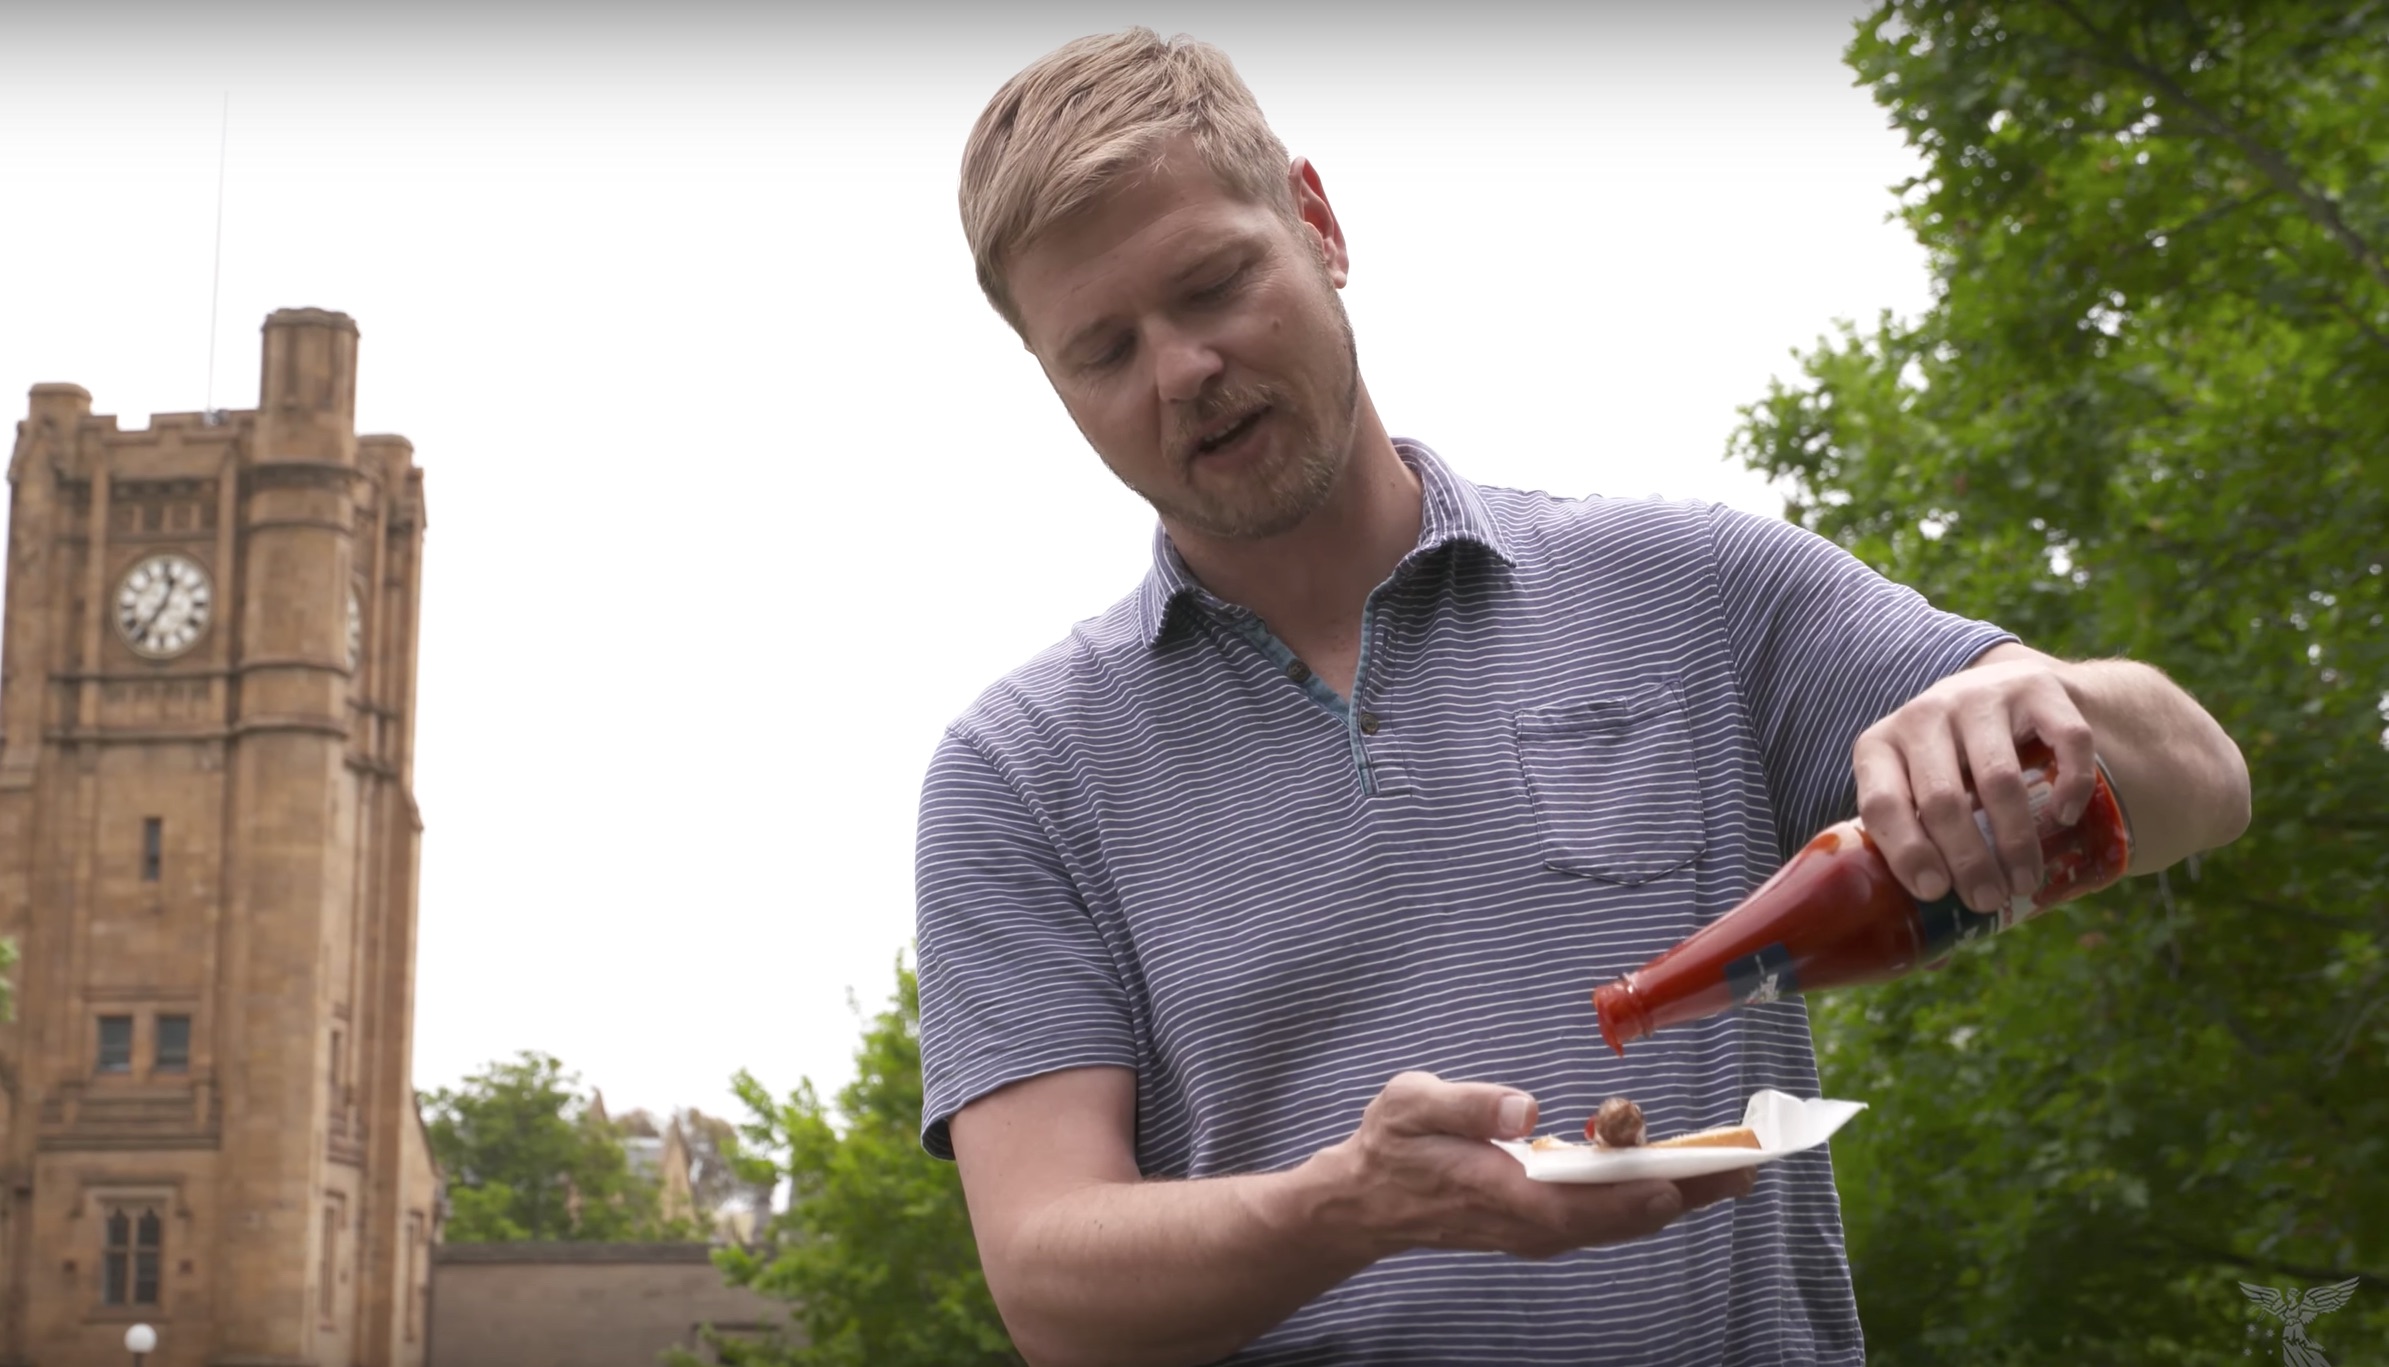 Engineering Professor Explains How To Get Ketchup Out Of A Glass Bottle